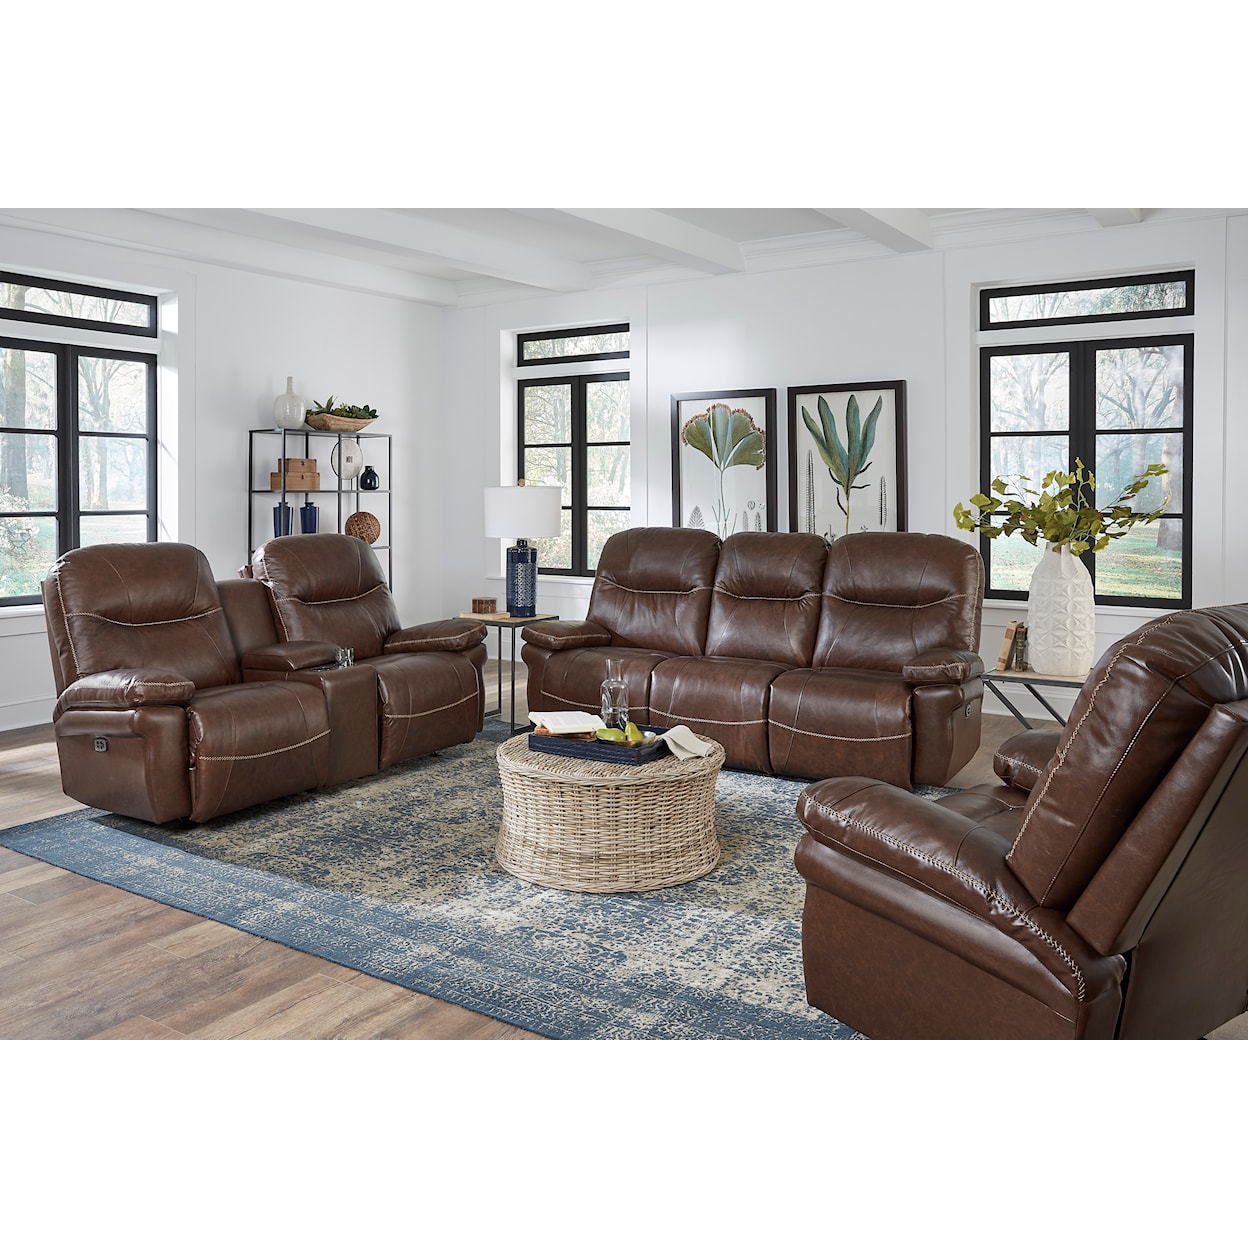 Best Home Furnishings Leya Leather Power Space Saver Recliner w/ HR